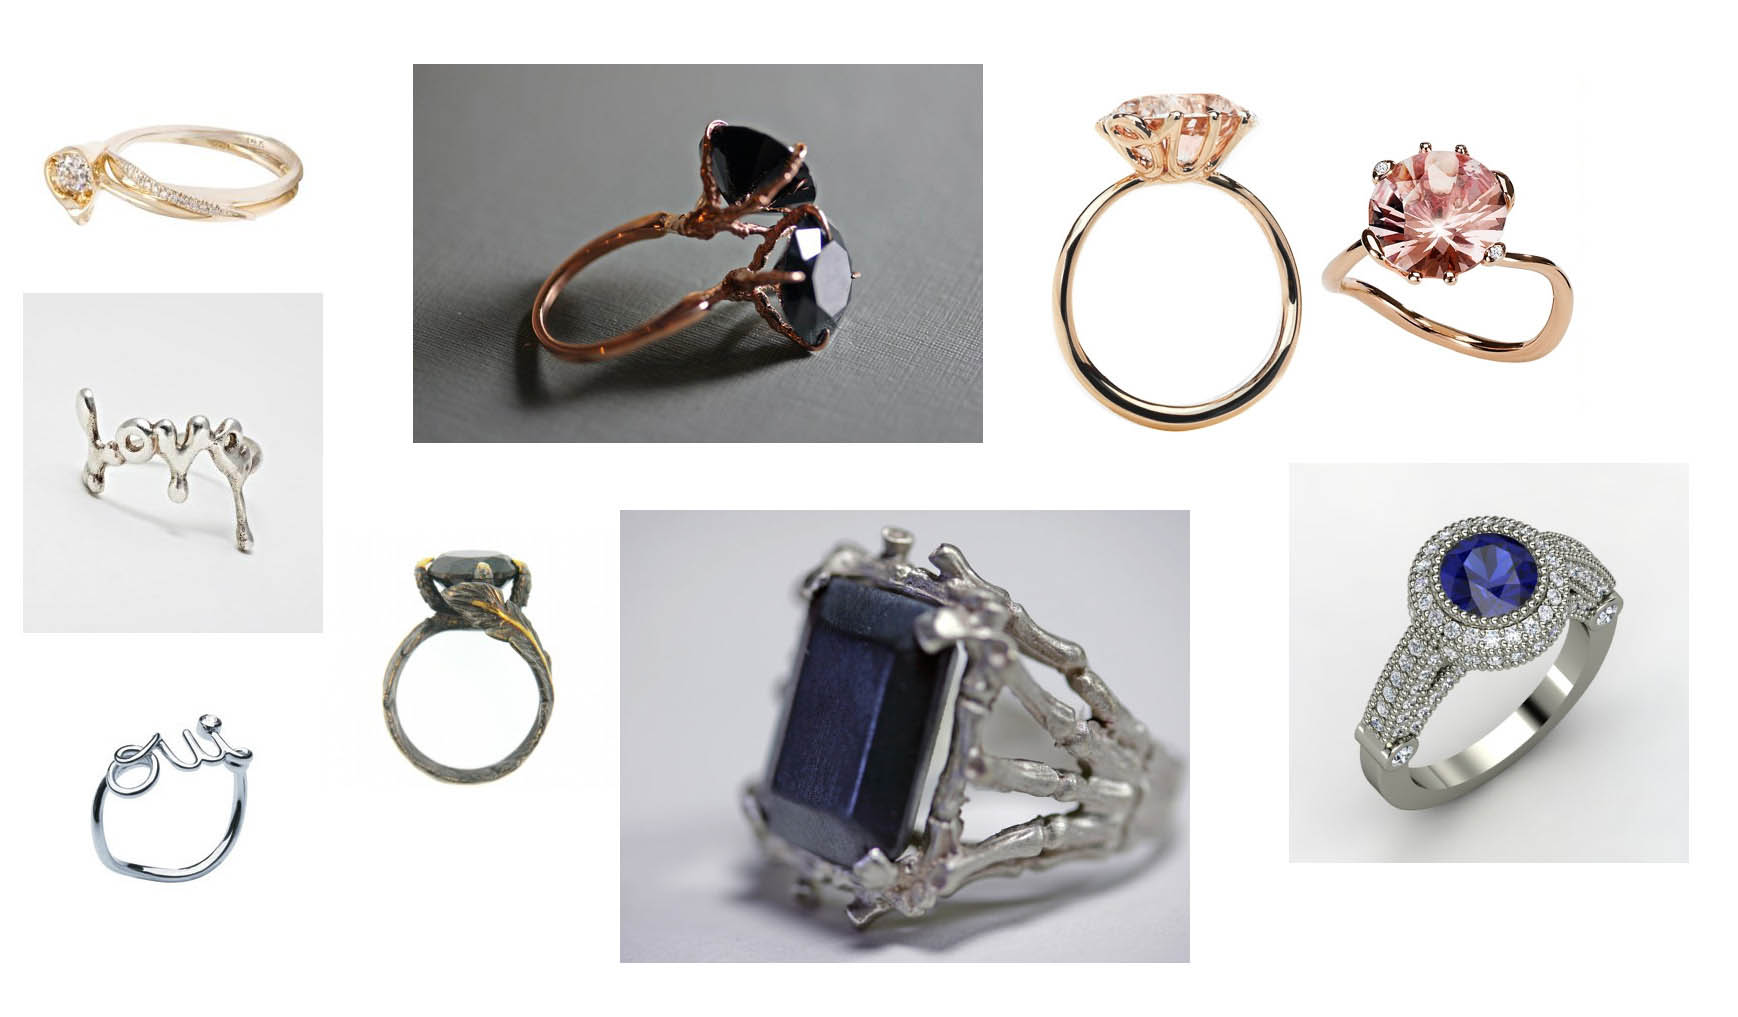 ... to add your own links to engagement rings you've seen and loved on